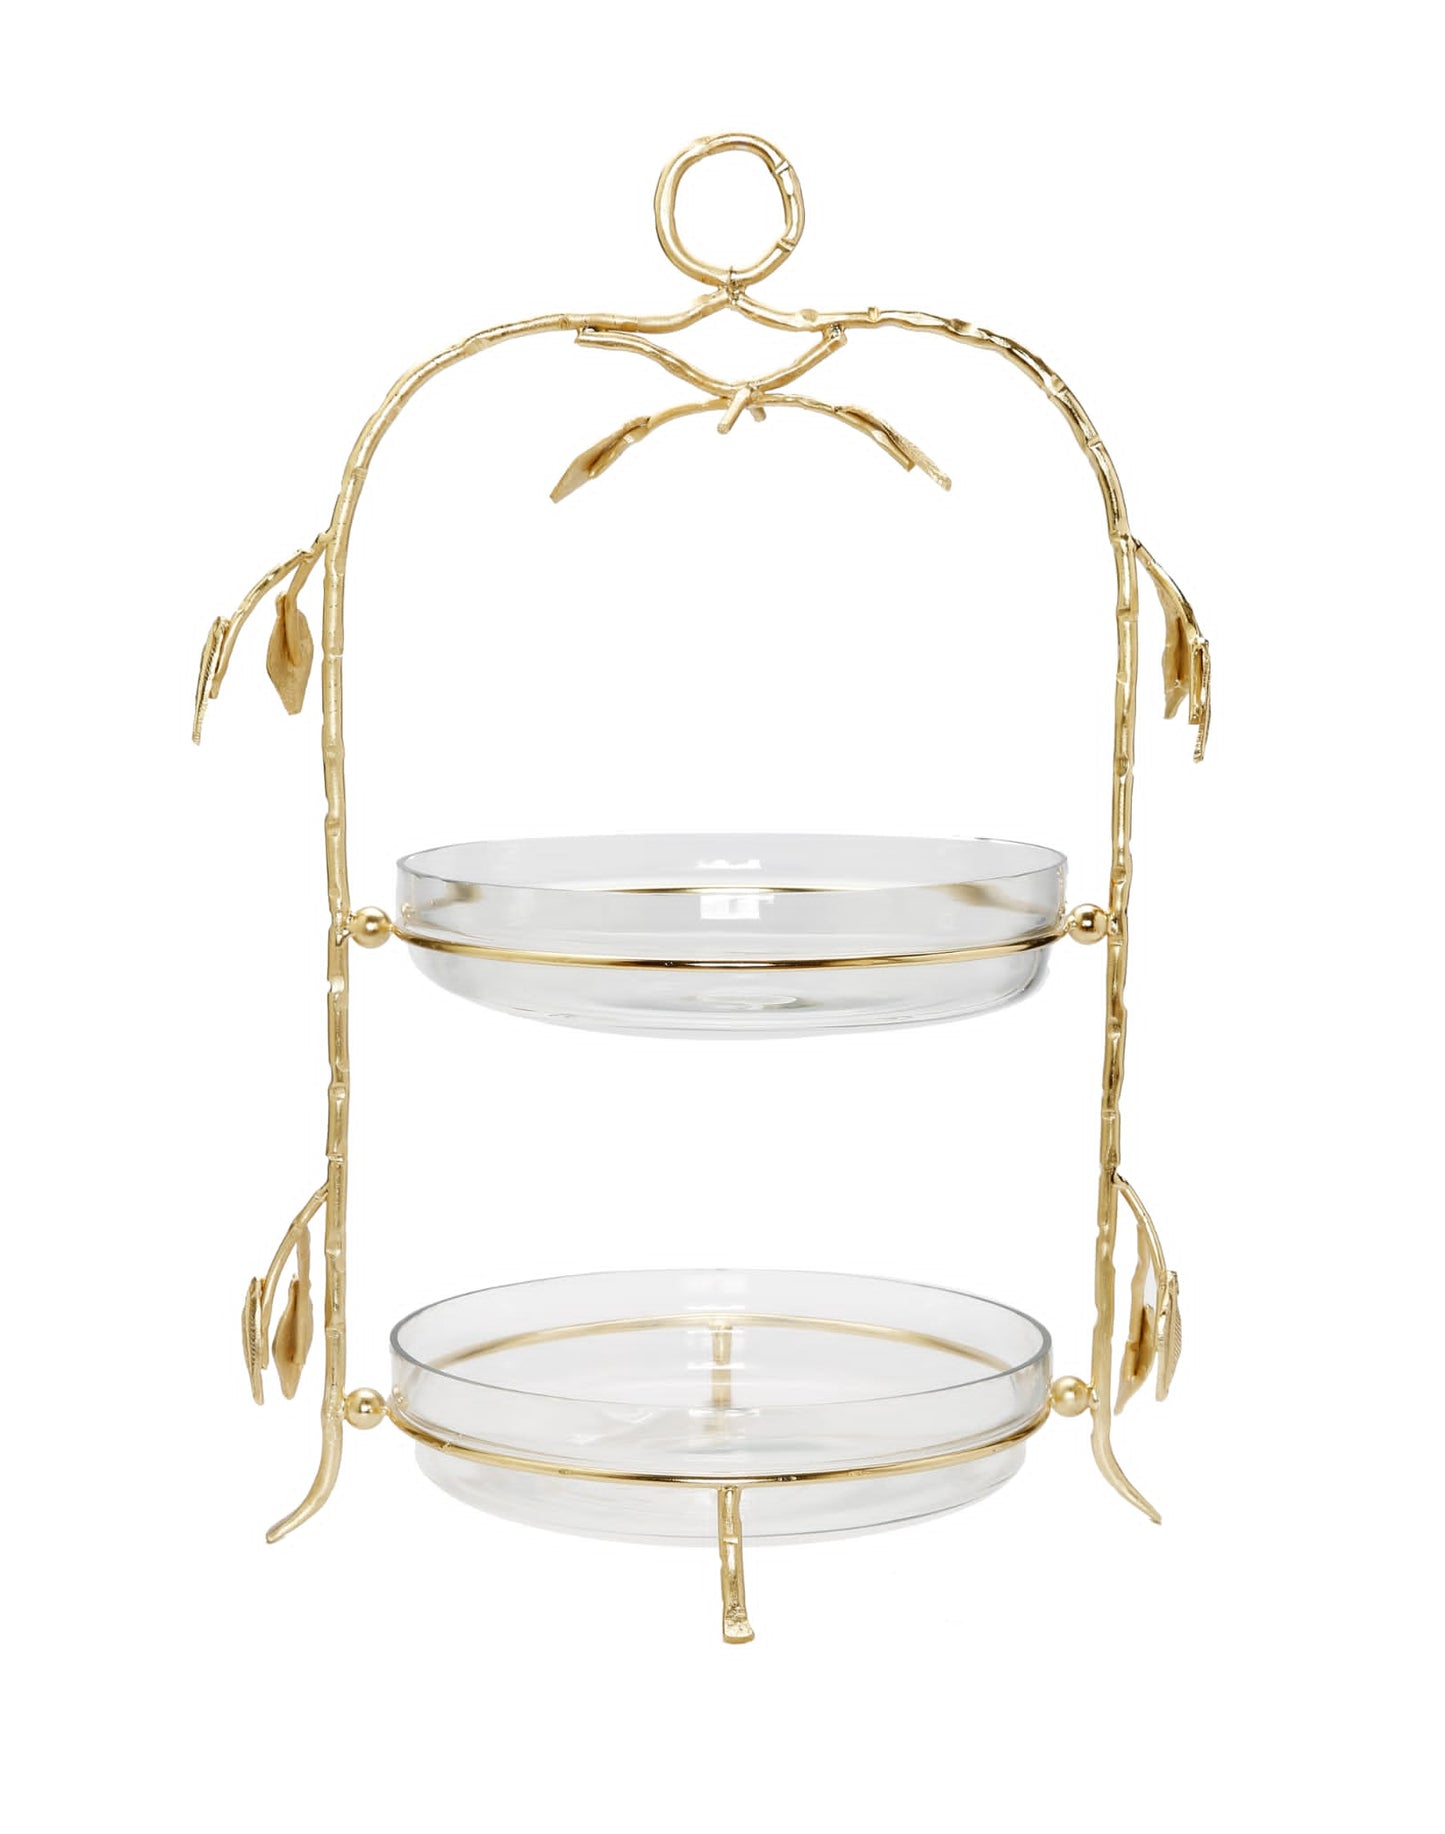 Two-Tiered Gold Leaf Serving Display